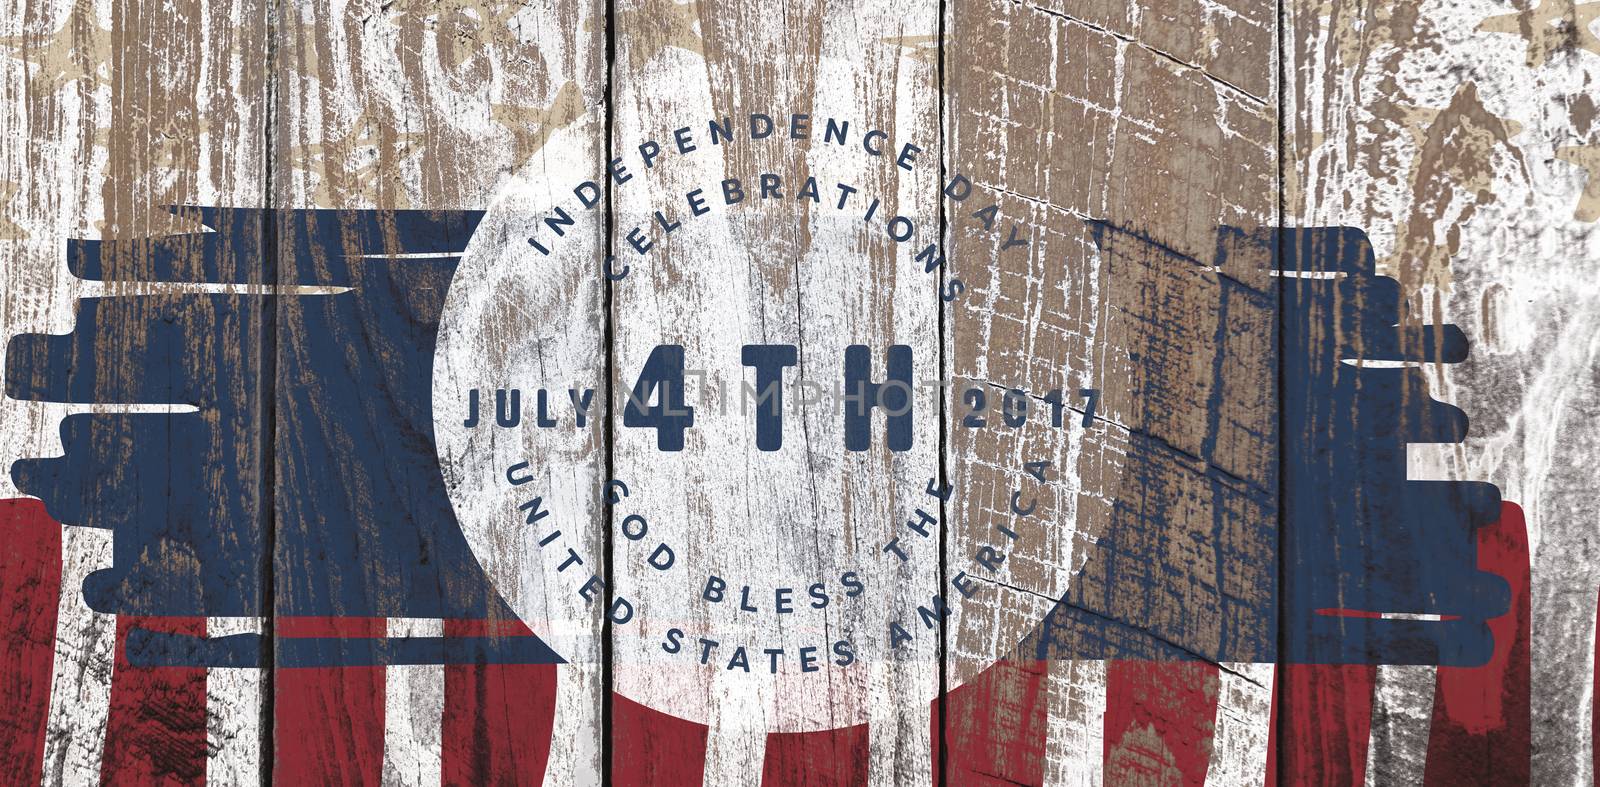 Multi colored happy 4th of july text against white background against wood panelling